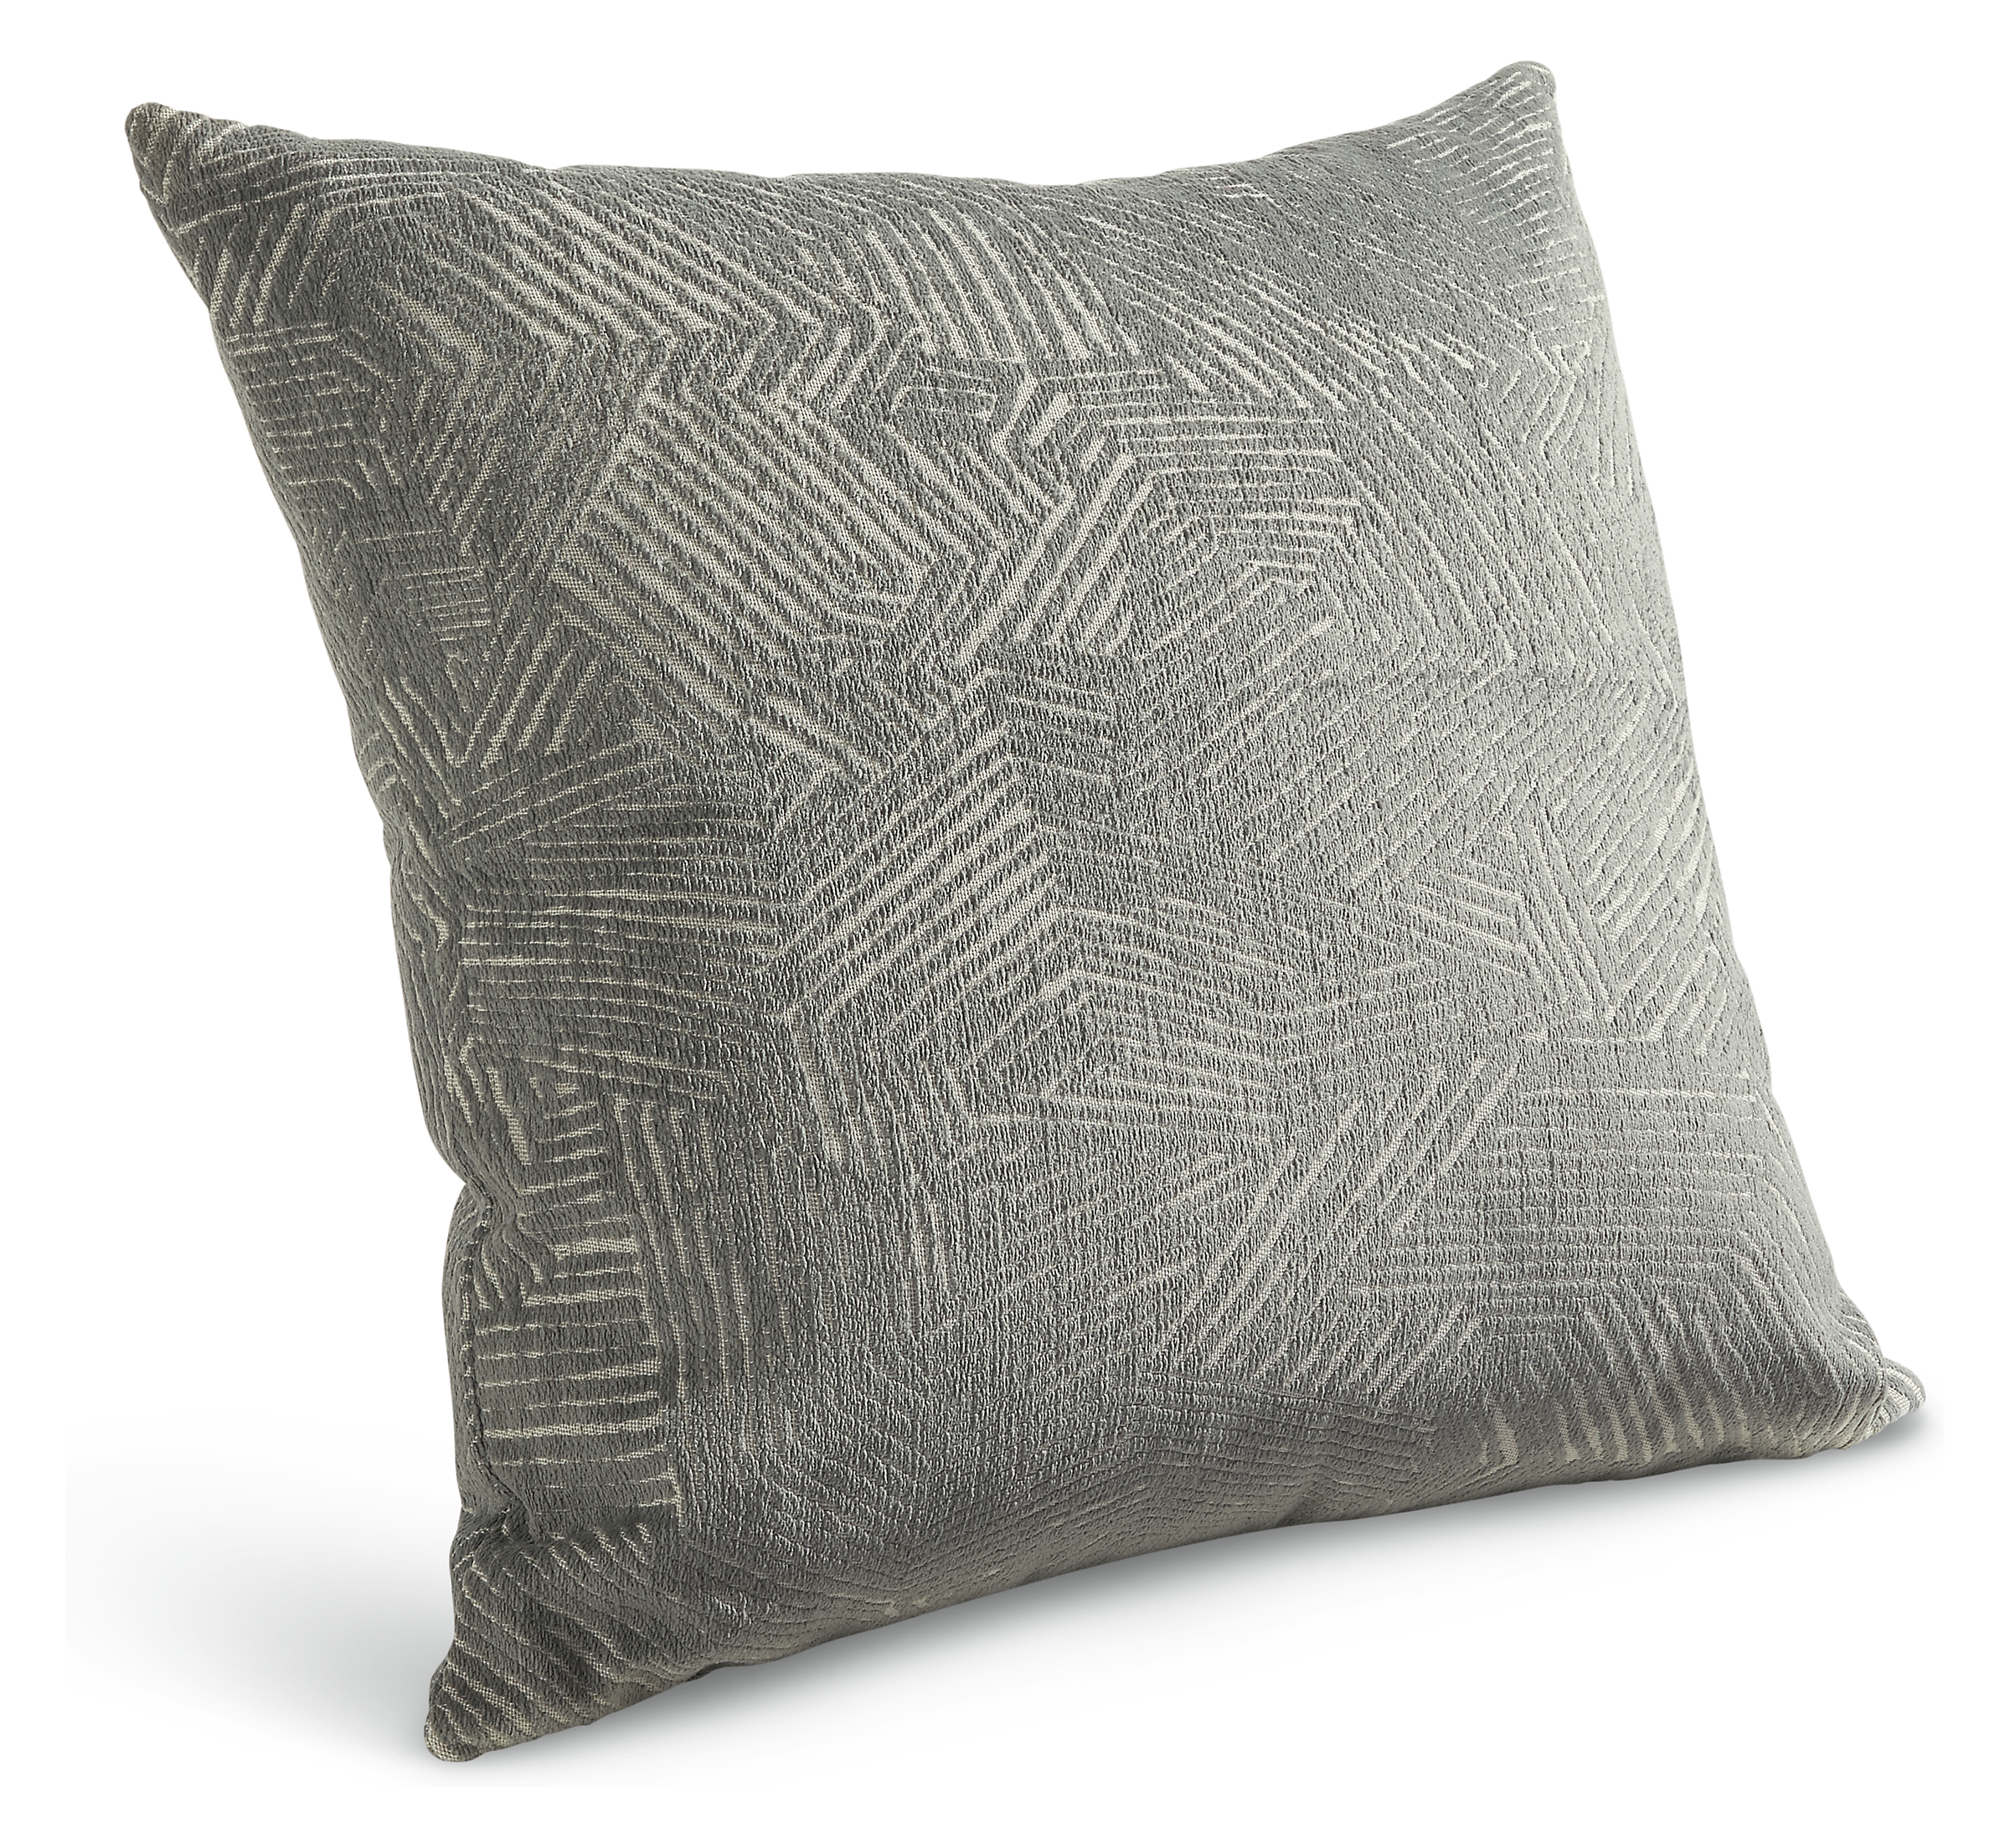 Ezra 20w 20h Outdoor Pillow in Charcoal